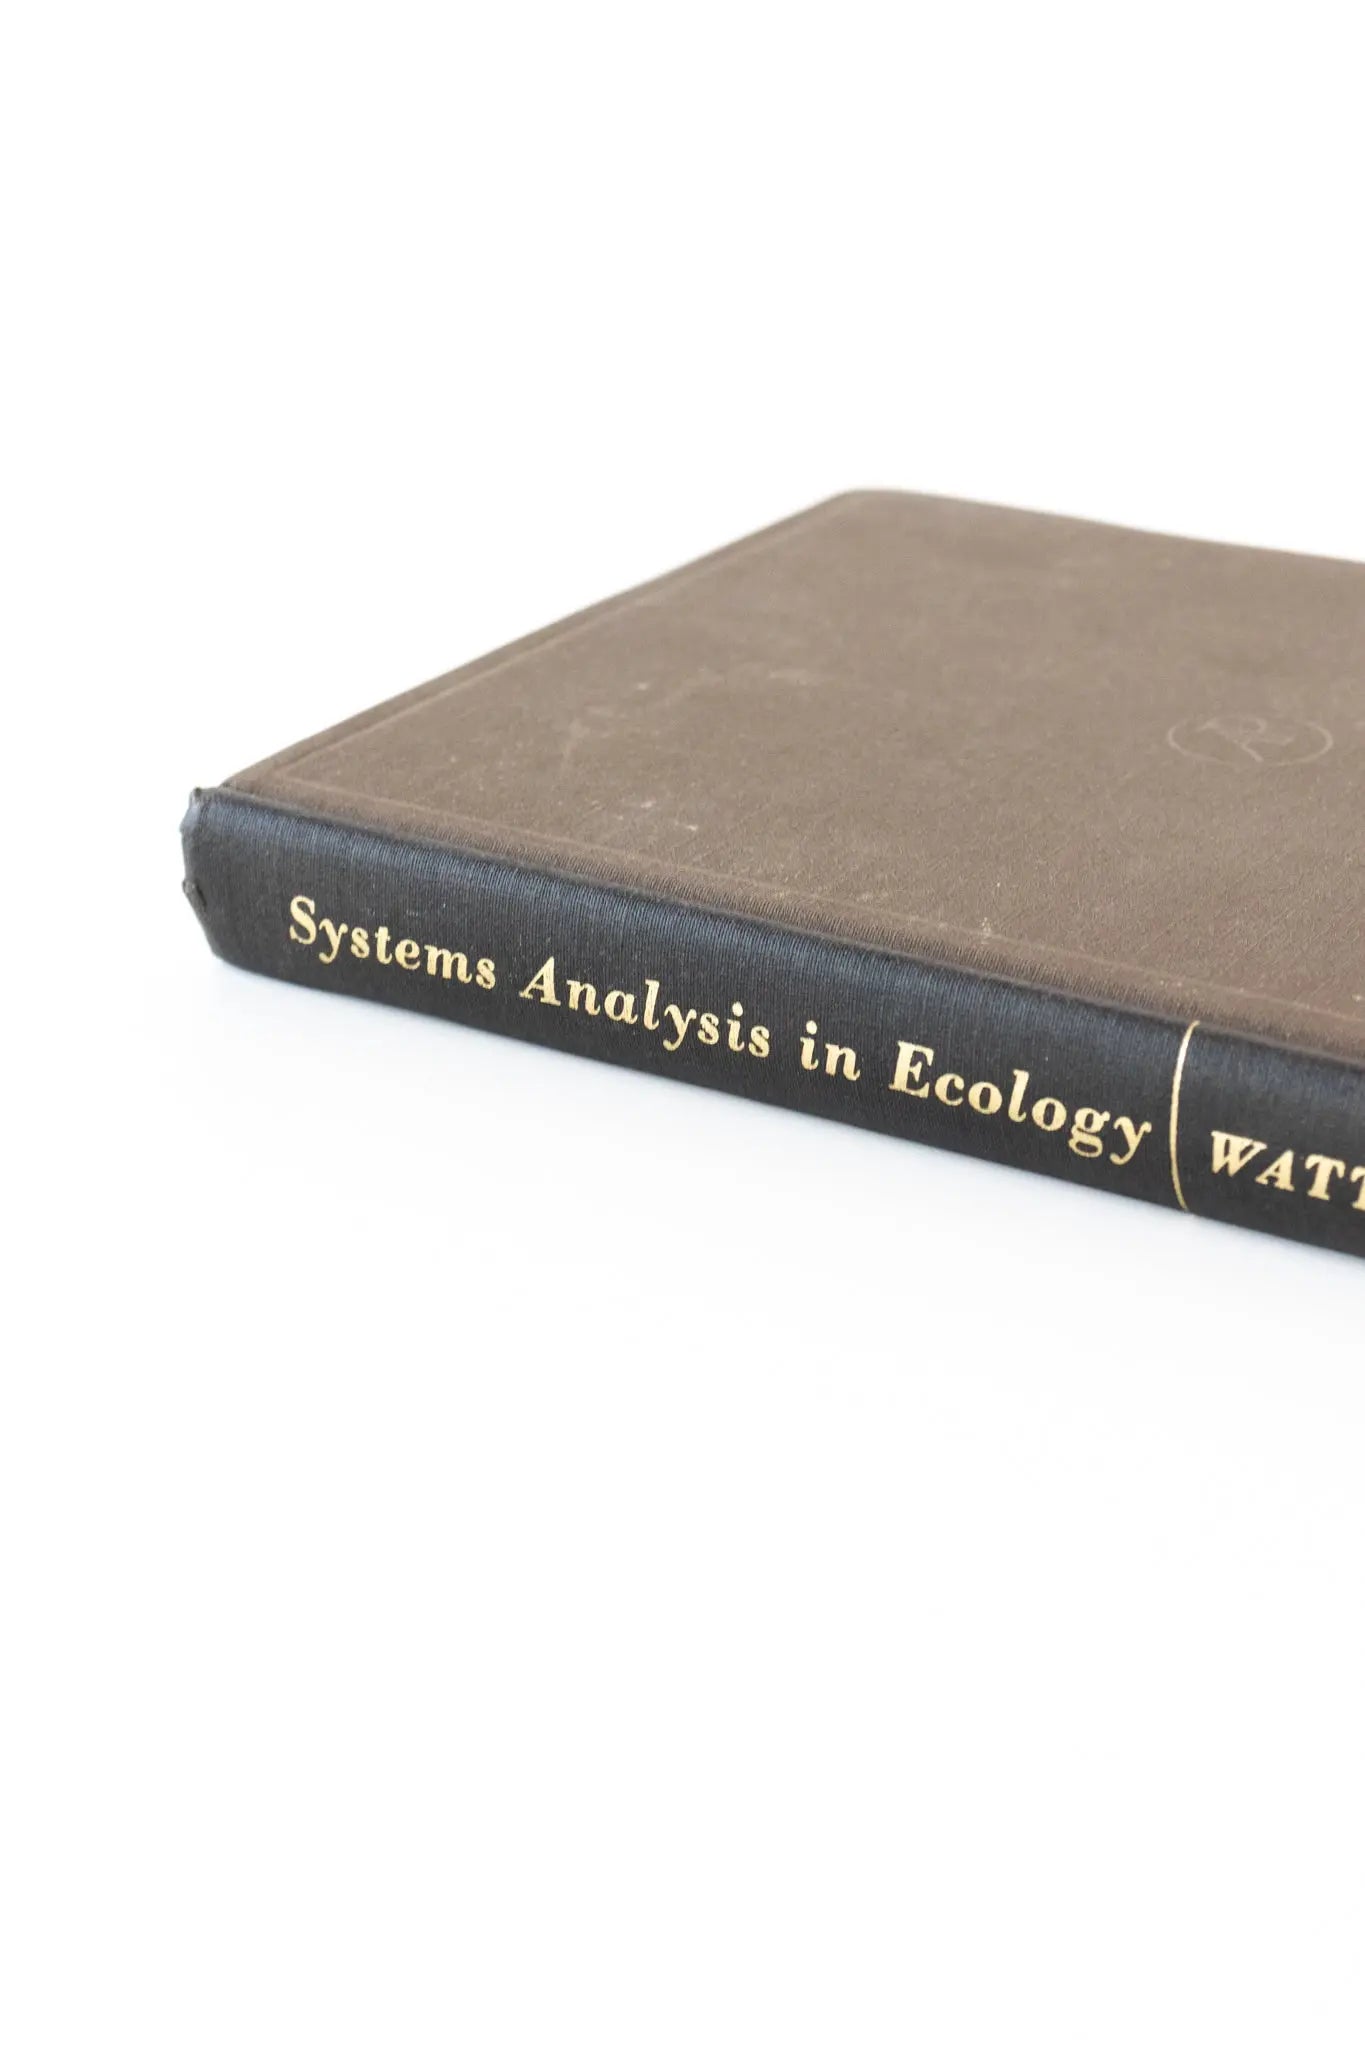 Systems Analysis in Ecology - Stemcell Science Shop